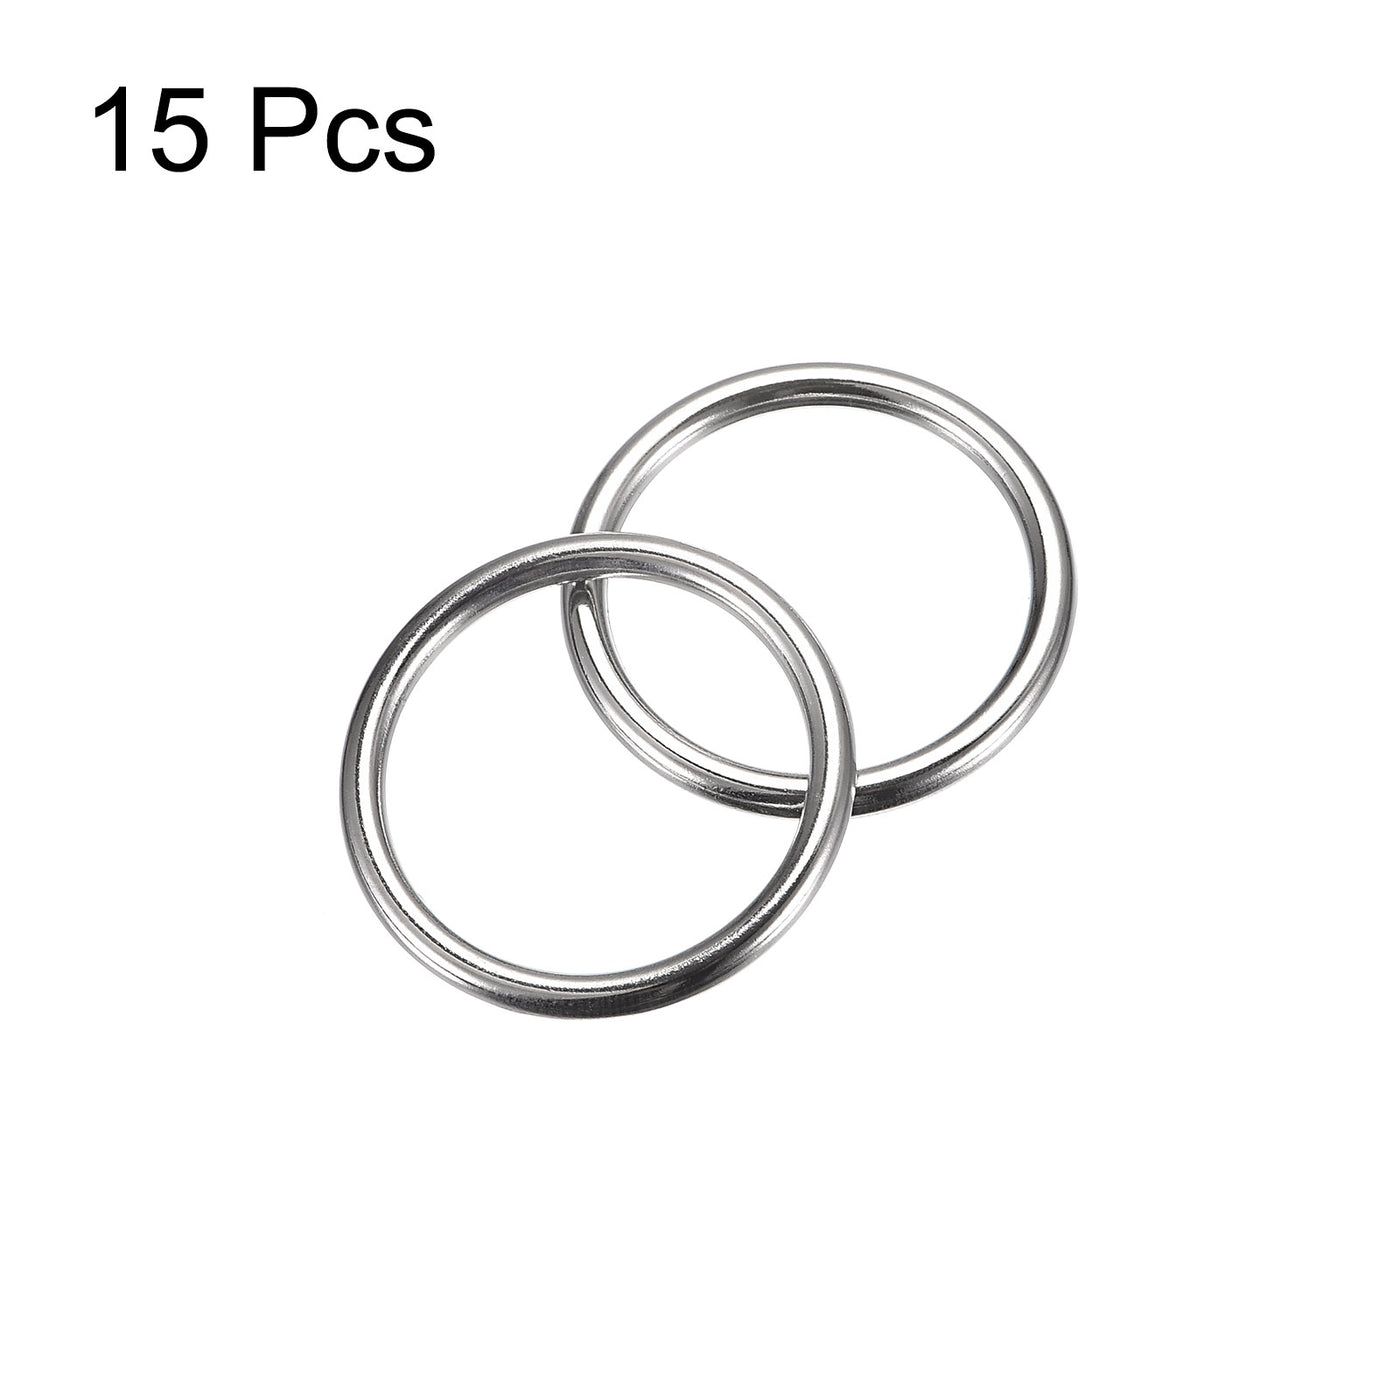 uxcell Uxcell Metal O Rings Multi-Purpose Welded O-Ring Buckle for Craft Belt Purse Bag Making Hardware